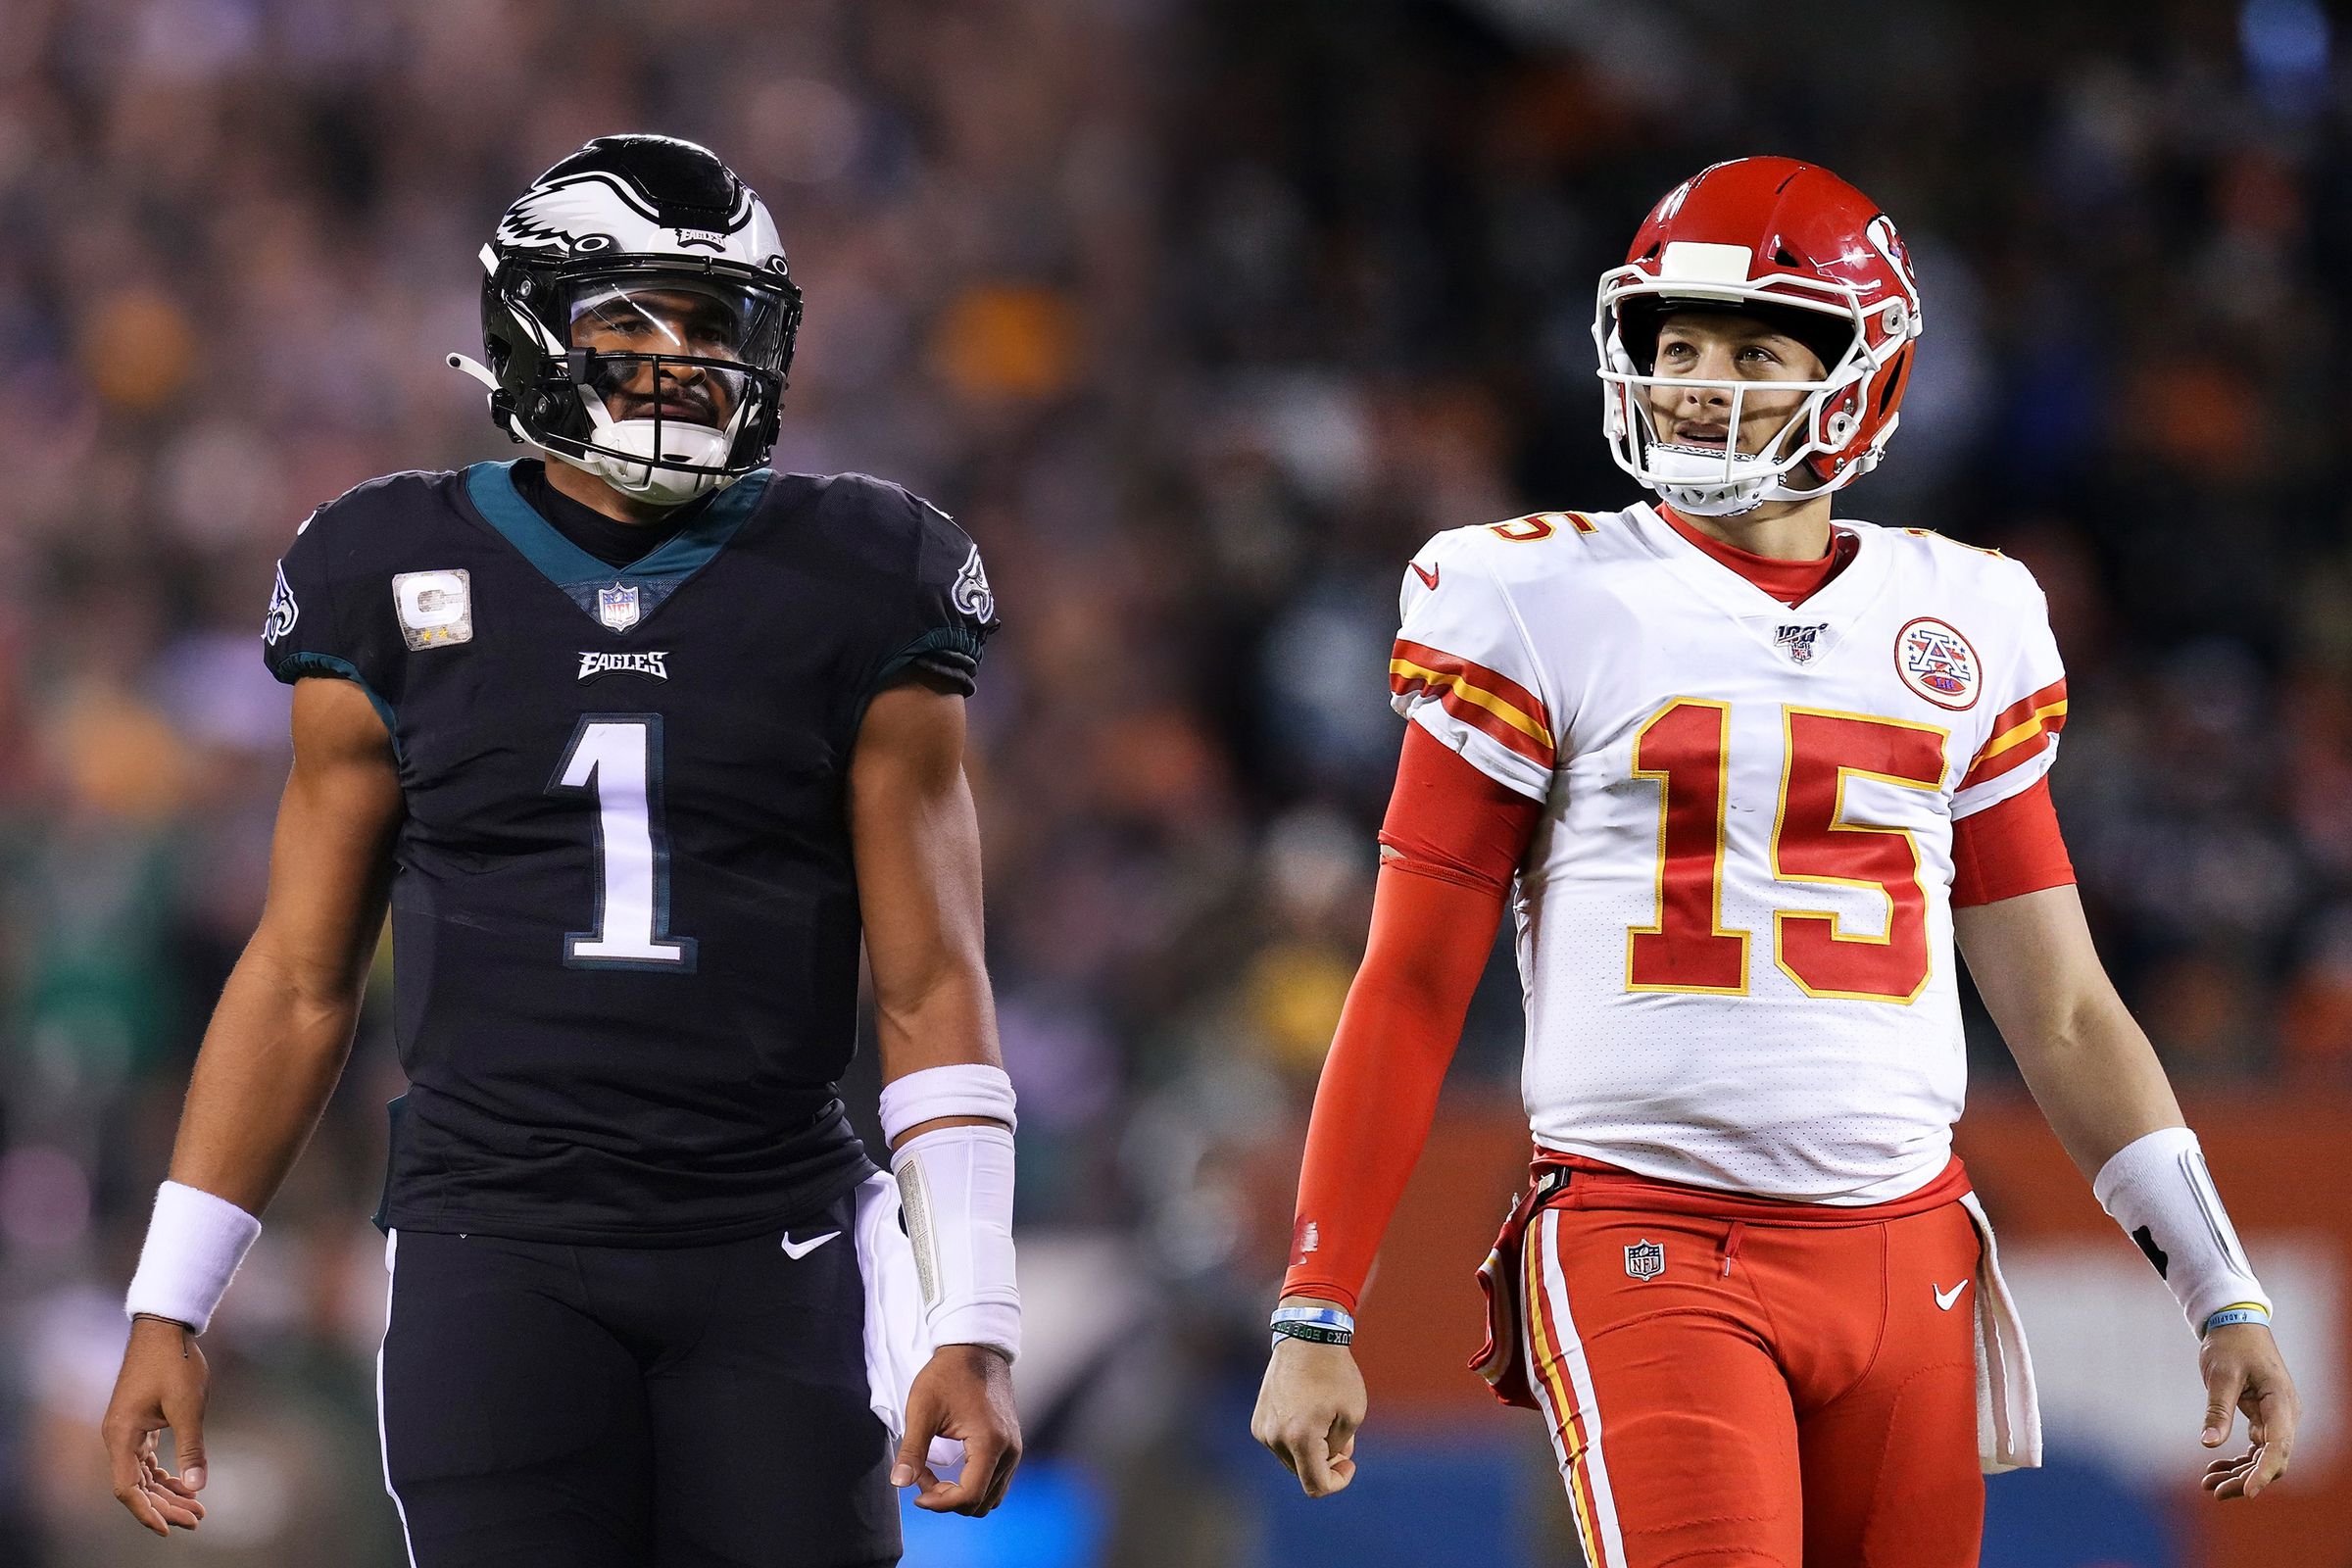 Eagles quarterback Jalen Hurts and Chiefs quarterback Patrick Mahomes are standing in football uniform with a blurry stadium audience in the background.